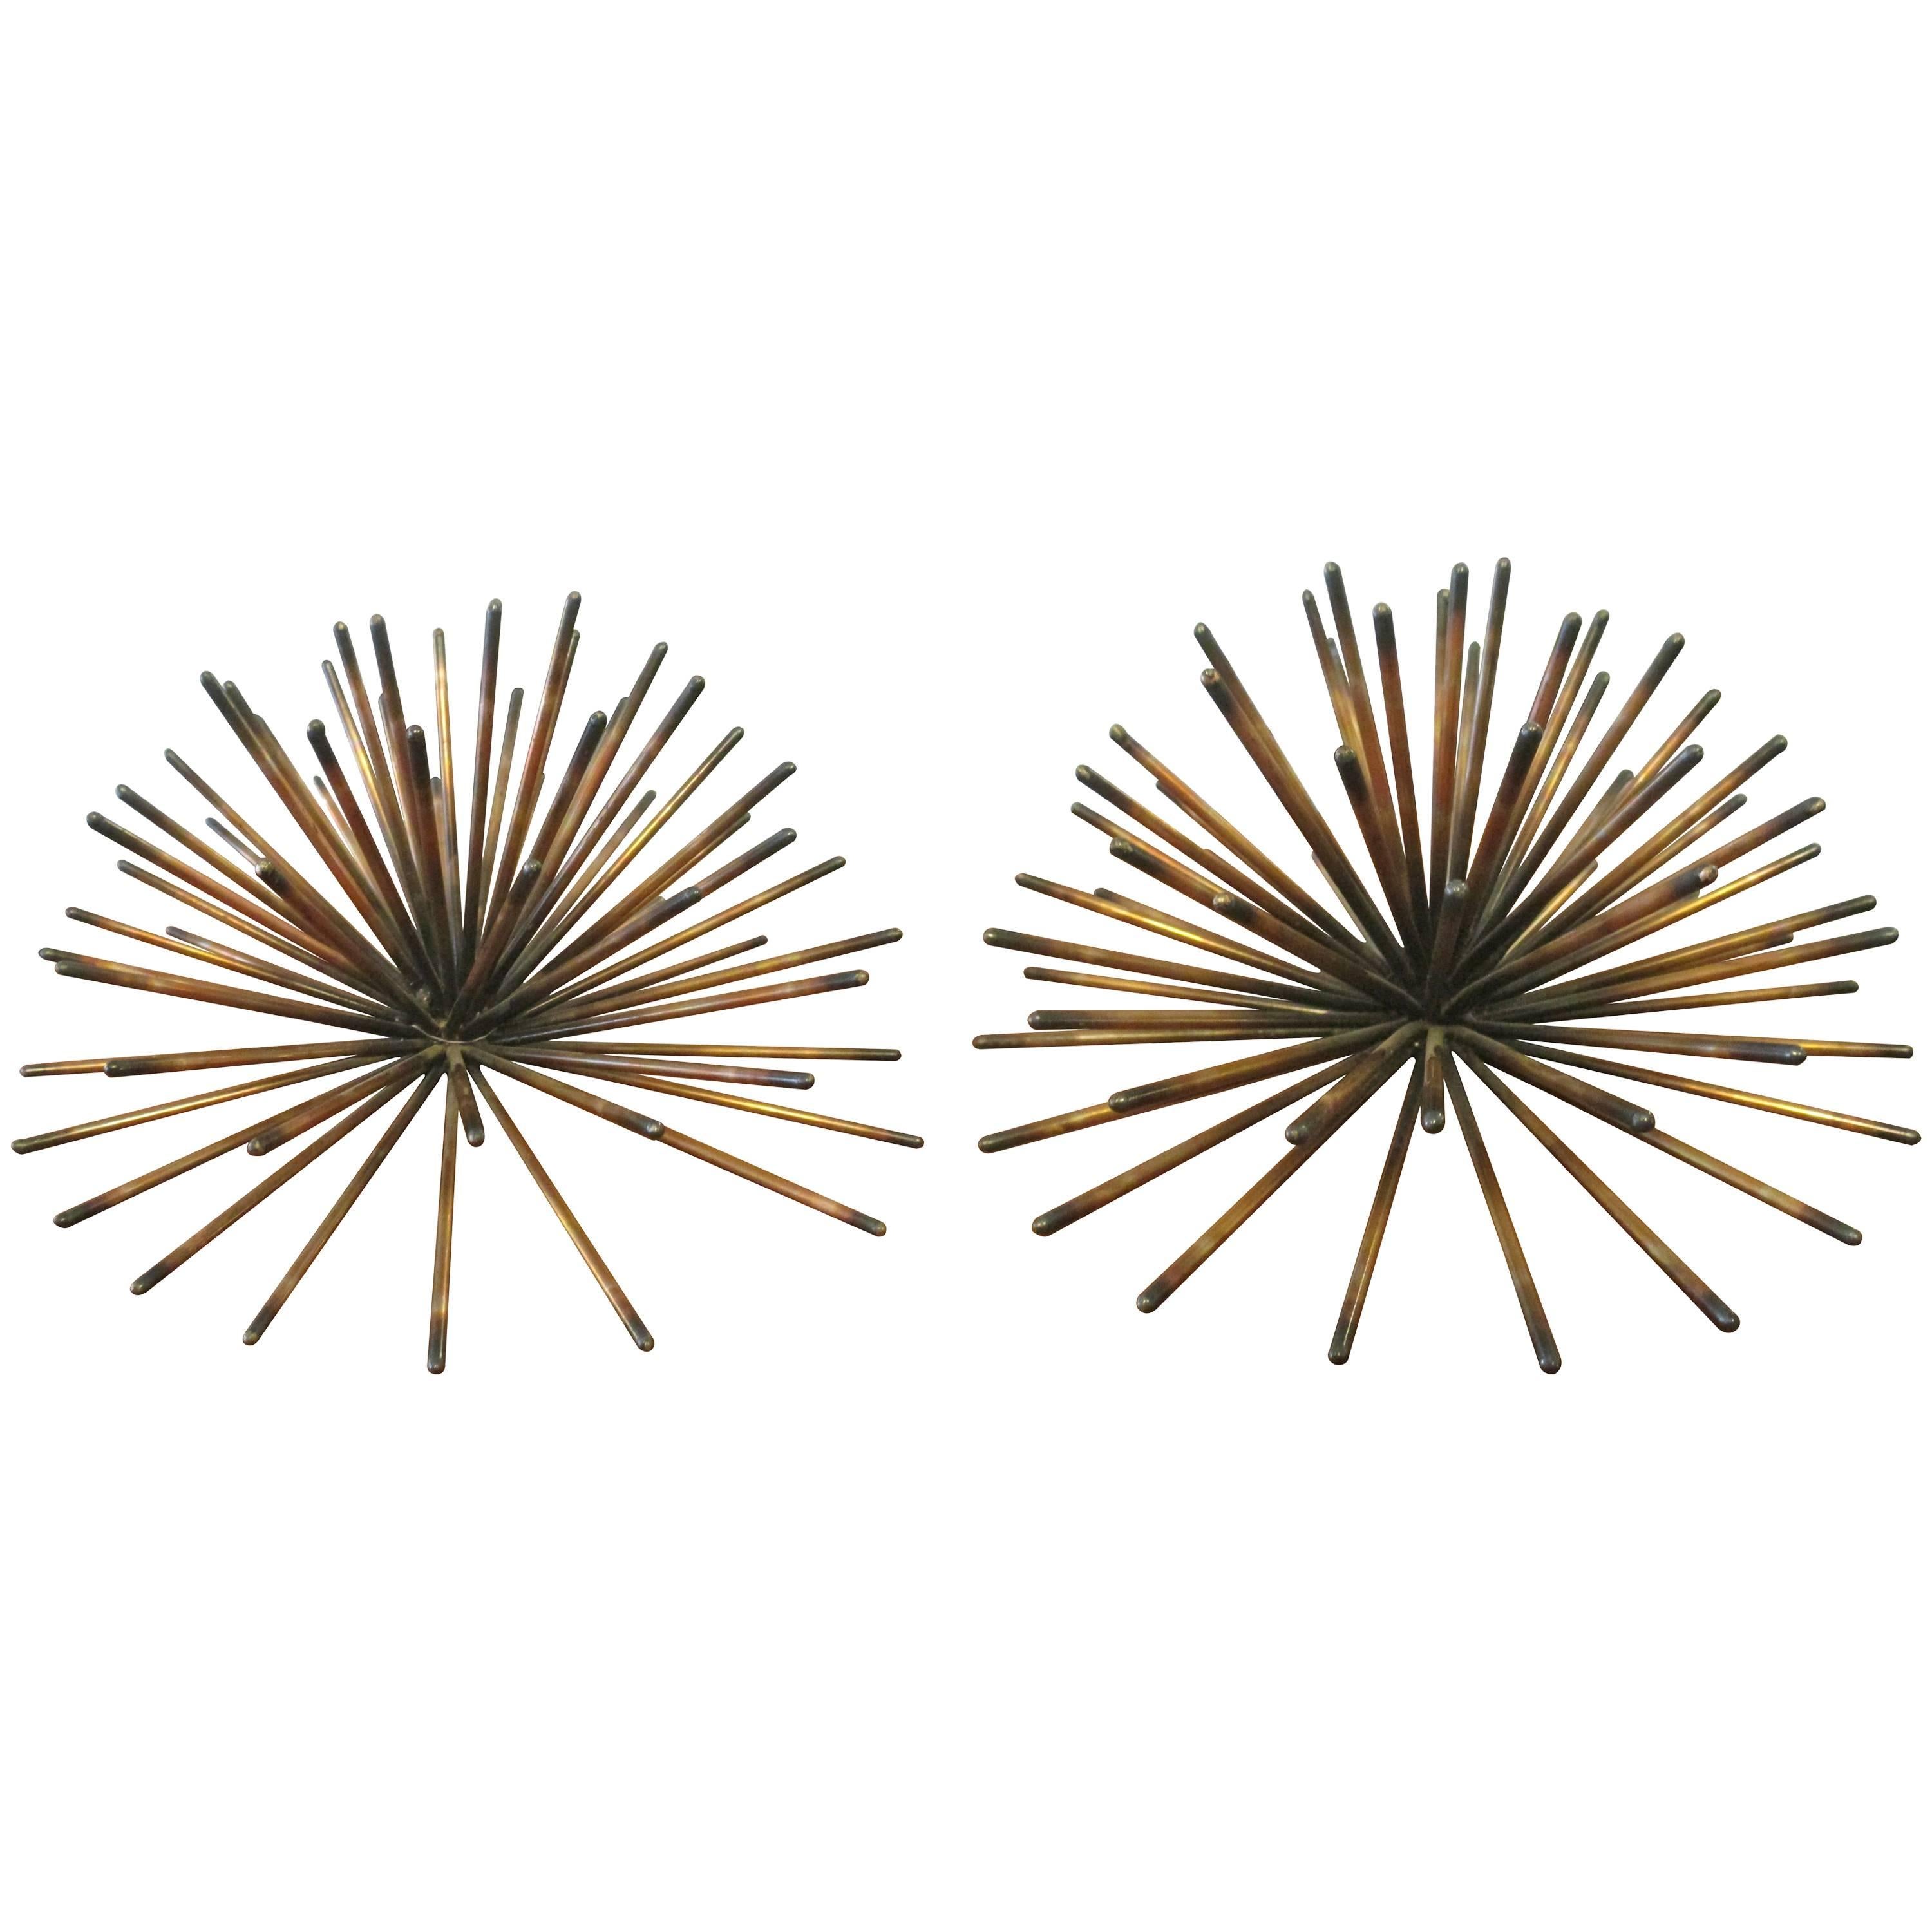 Pair of Urchin Sculptures by Curtis Jere, 1970s For Sale